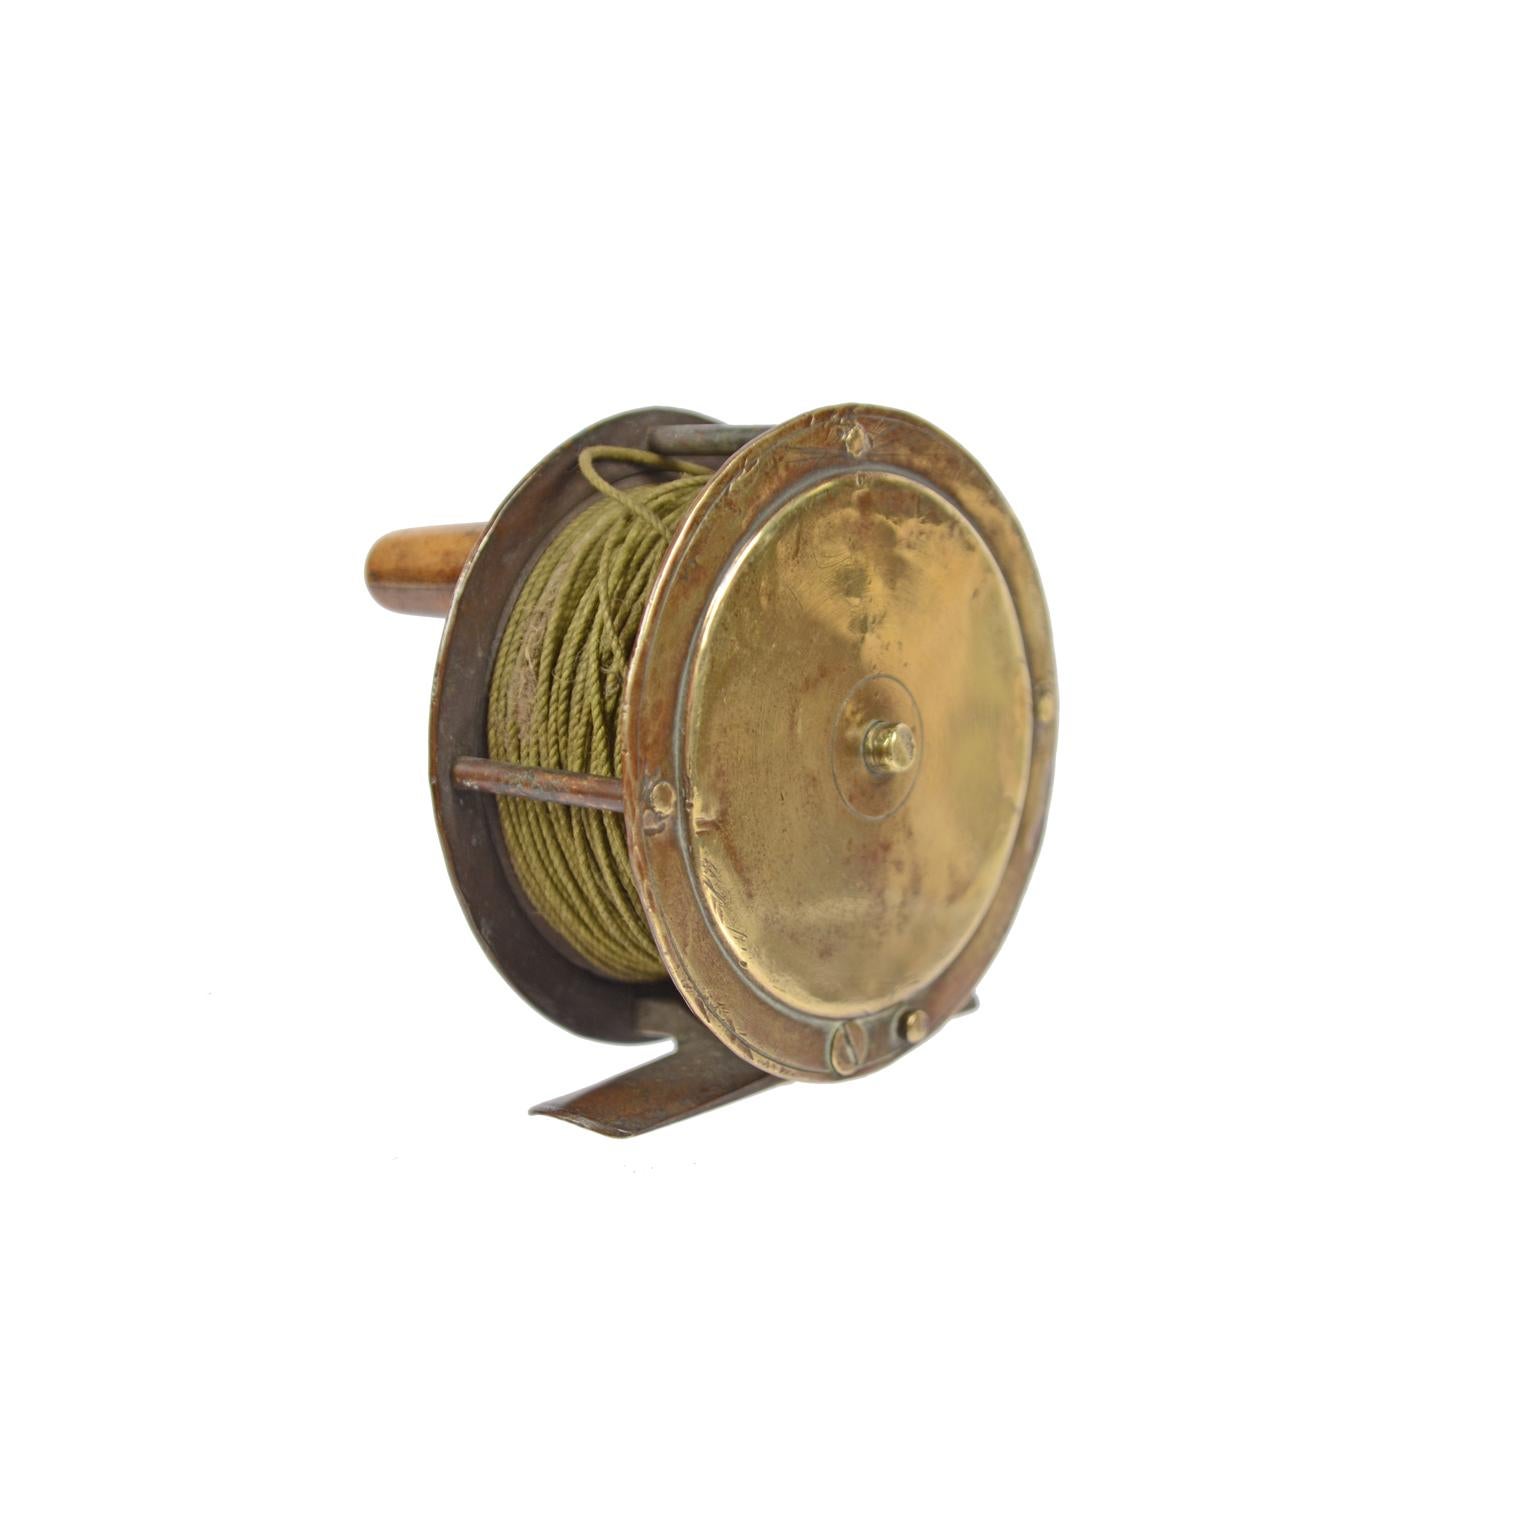 Antique English fishing reel, made of brass. English manufacture, early 1900s. Diameter cm 8. Very good condition.
Shipping in insured by Lloyd's London and the gift box is free (look at the last picture).
 